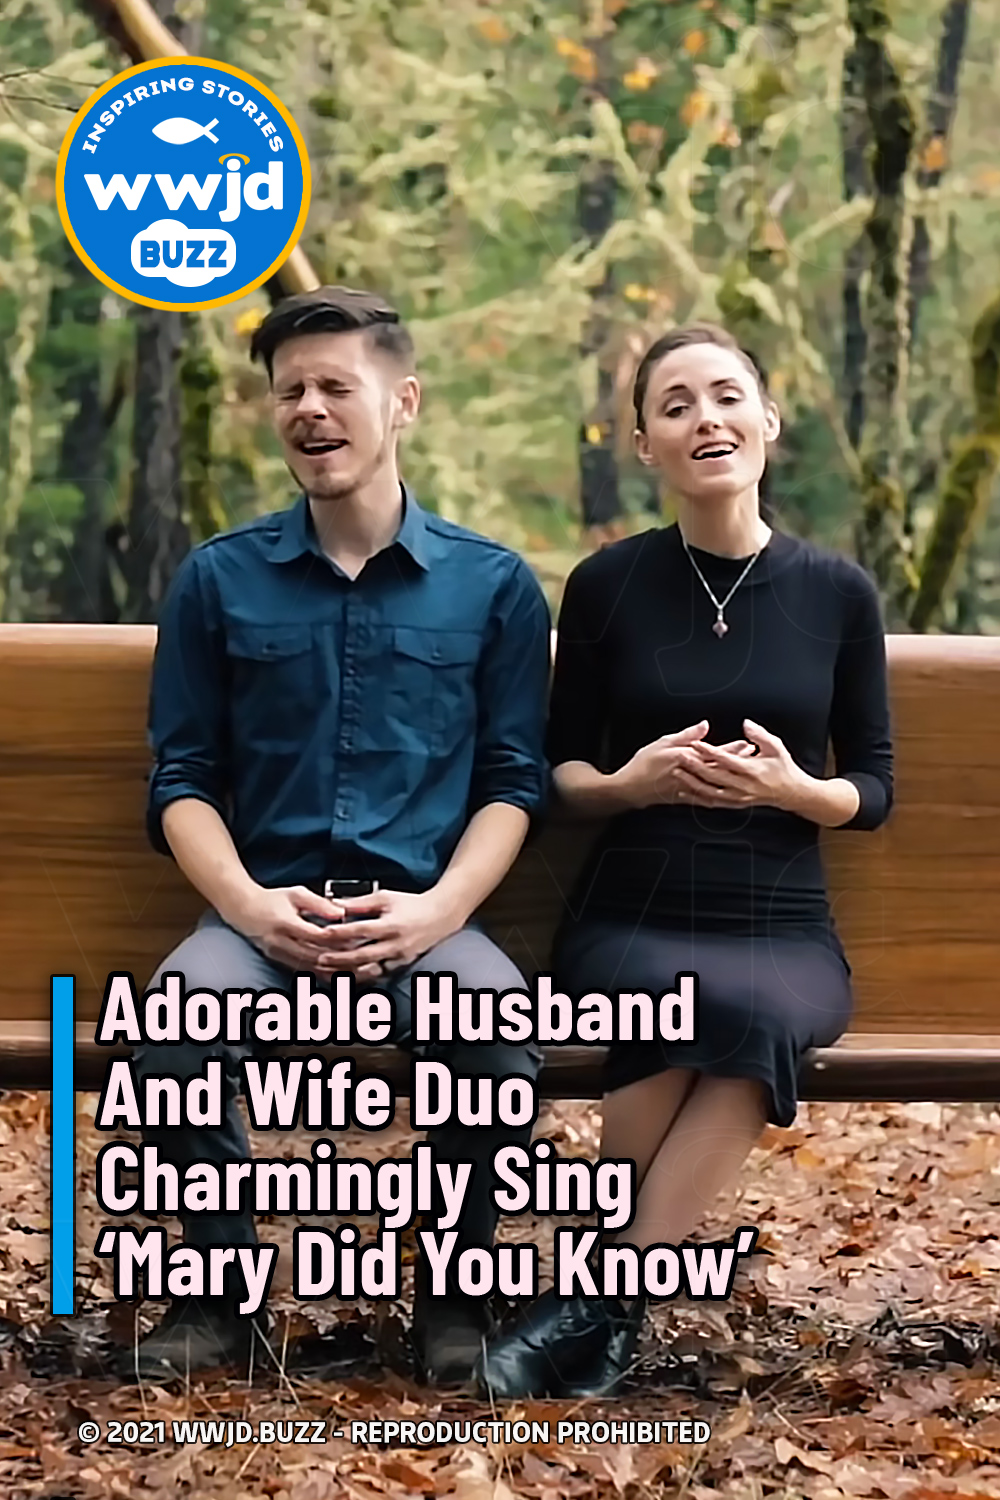 Adorable Husband And Wife Duo Charmingly Sing ‘Mary Did You Know’